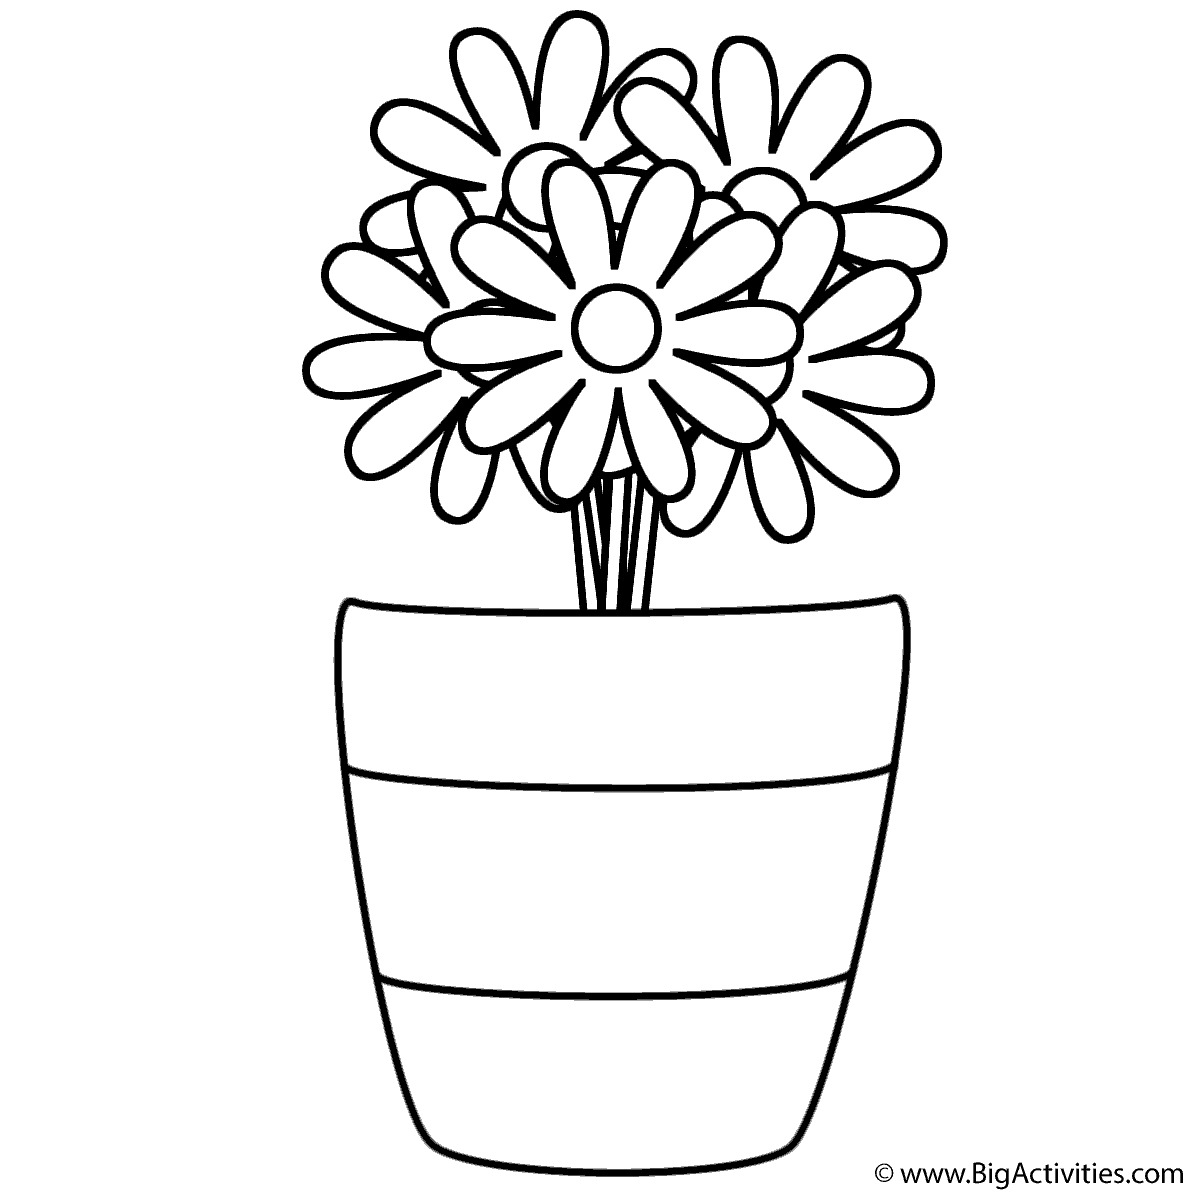 Flowers in Vase with Stripes - Coloring Page (Summer)